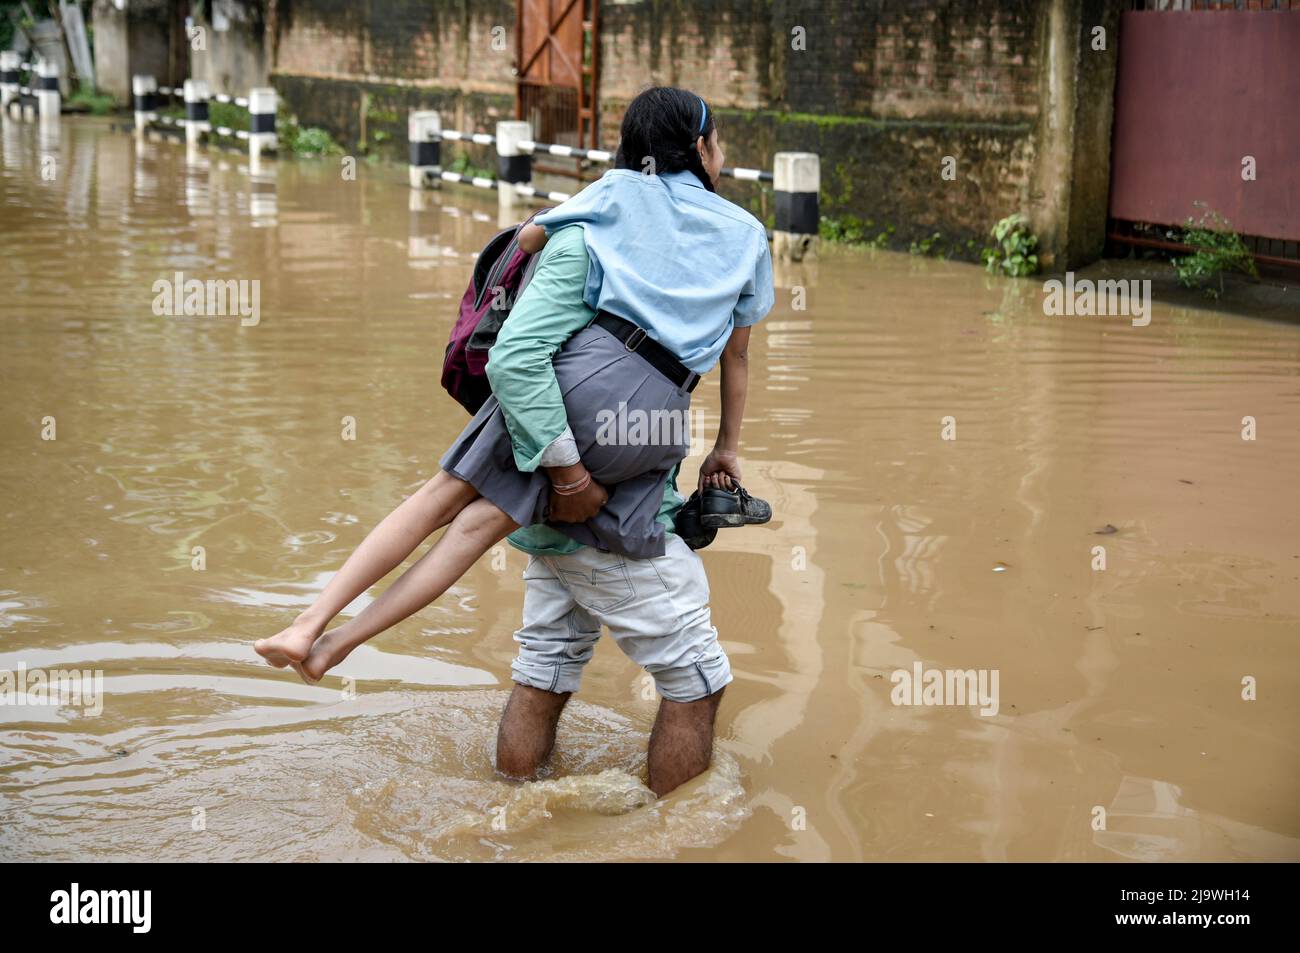 Guwahati, Assam, India. 25th May, 2022. A man returns his daughter from school wades across a flooded street after heavy rains, in Guwahati, Assam, India on 25 May 2022. Waterlogging is a common scene in Guwahati city due to poor drainage system. Credit: David Talukdar/Alamy Live News Stock Photo